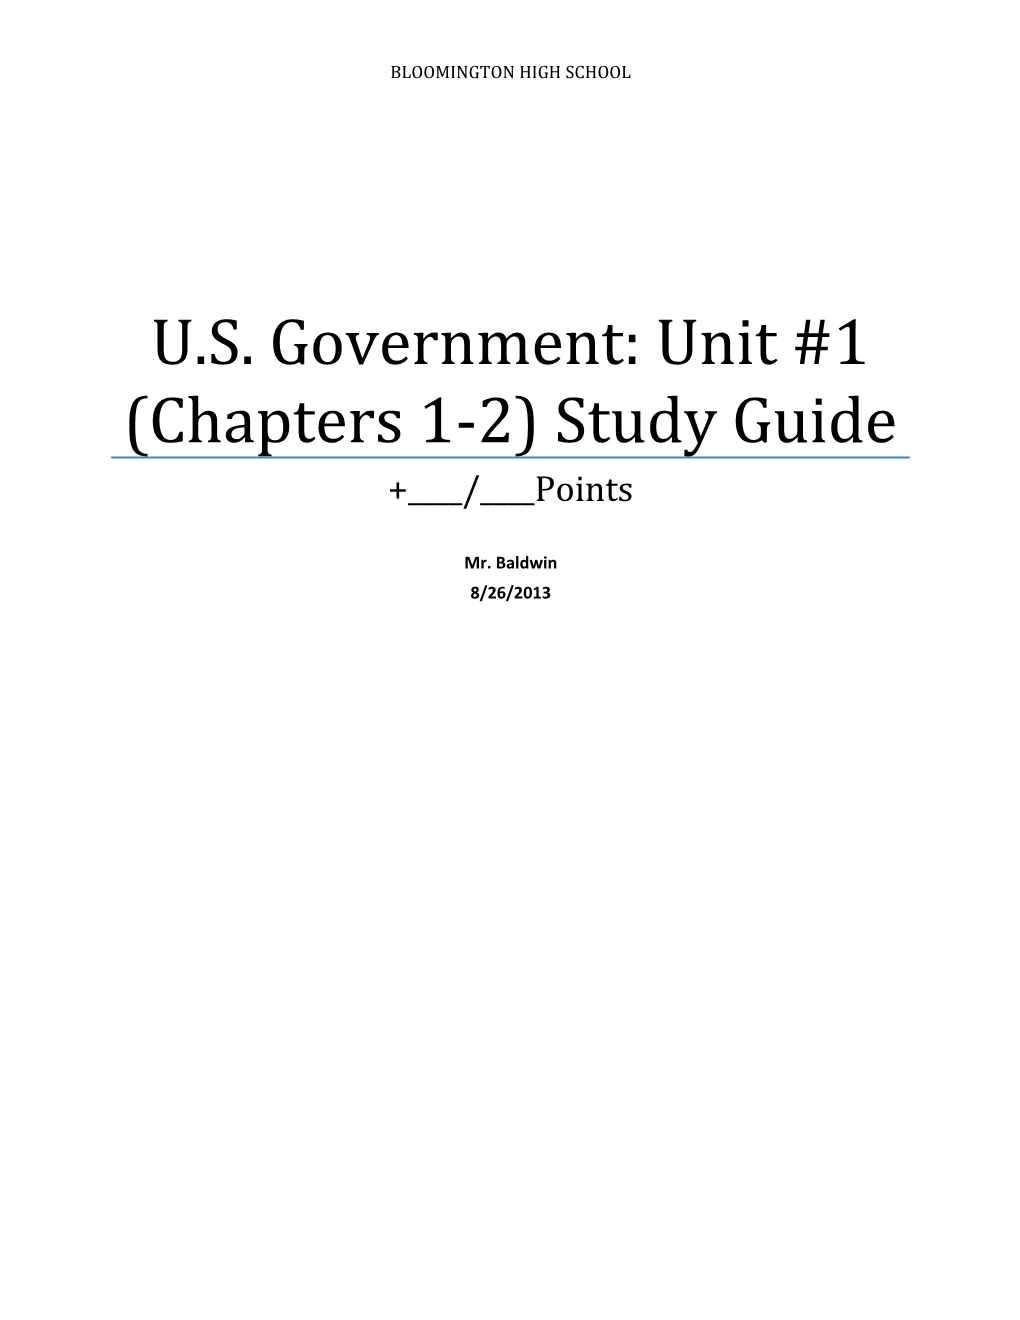 U.S. Government: Unit #1 (Chapters 1-2) Study Guide